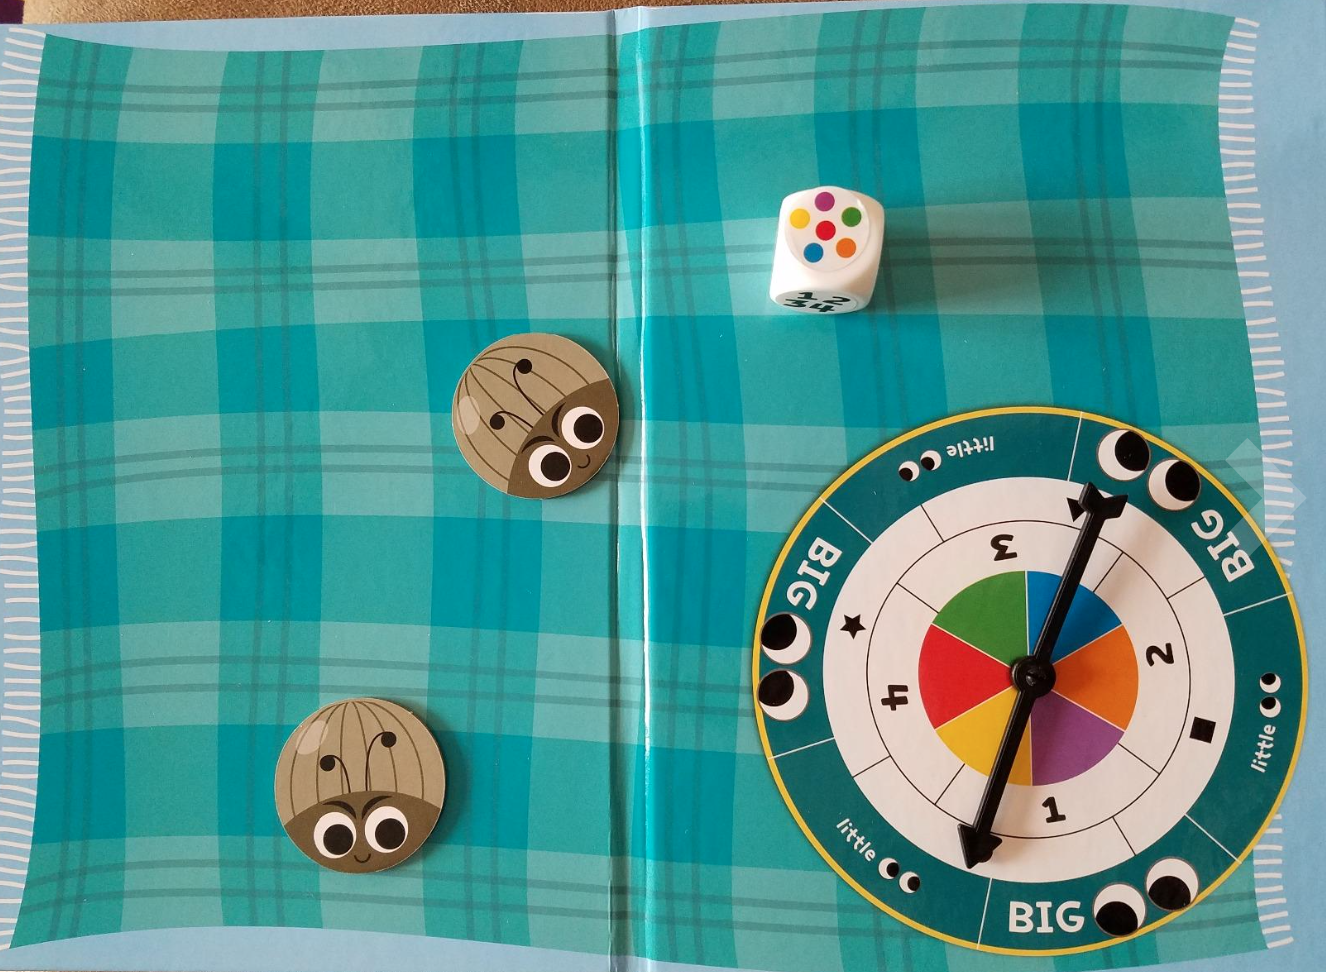 Board game setup with a colorful spinner wheel, a multi-colored die, and two tokens with cartoonish faces on a checkered background